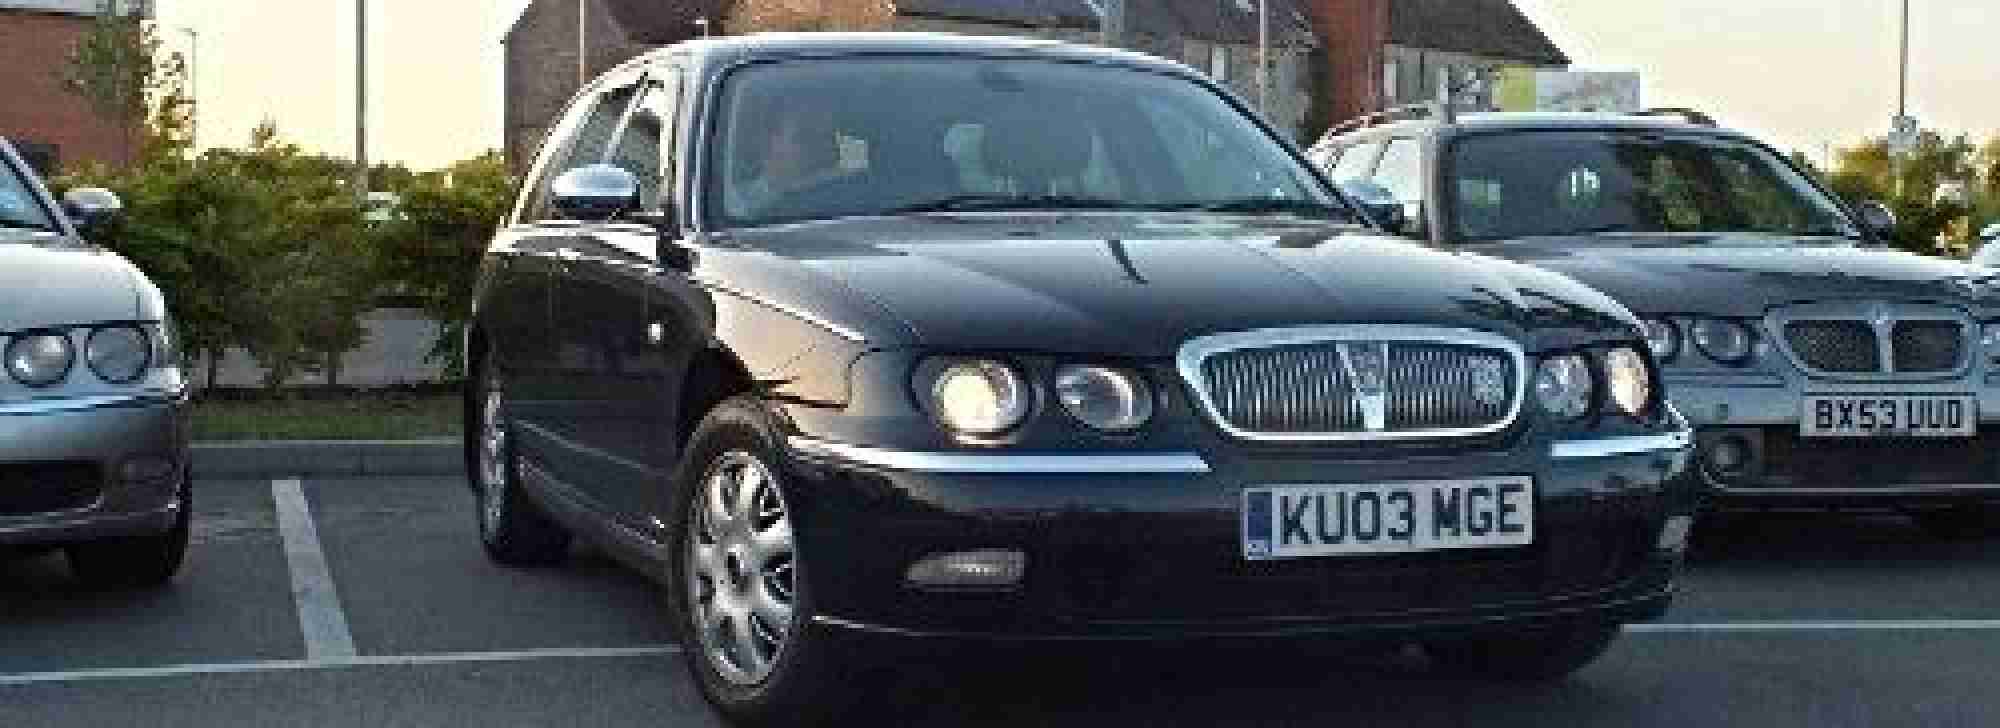 Rover 75 1.8 Turbo Automatic Tourer 43,000 miles LPG Cruise Leather PRIVATE SALE